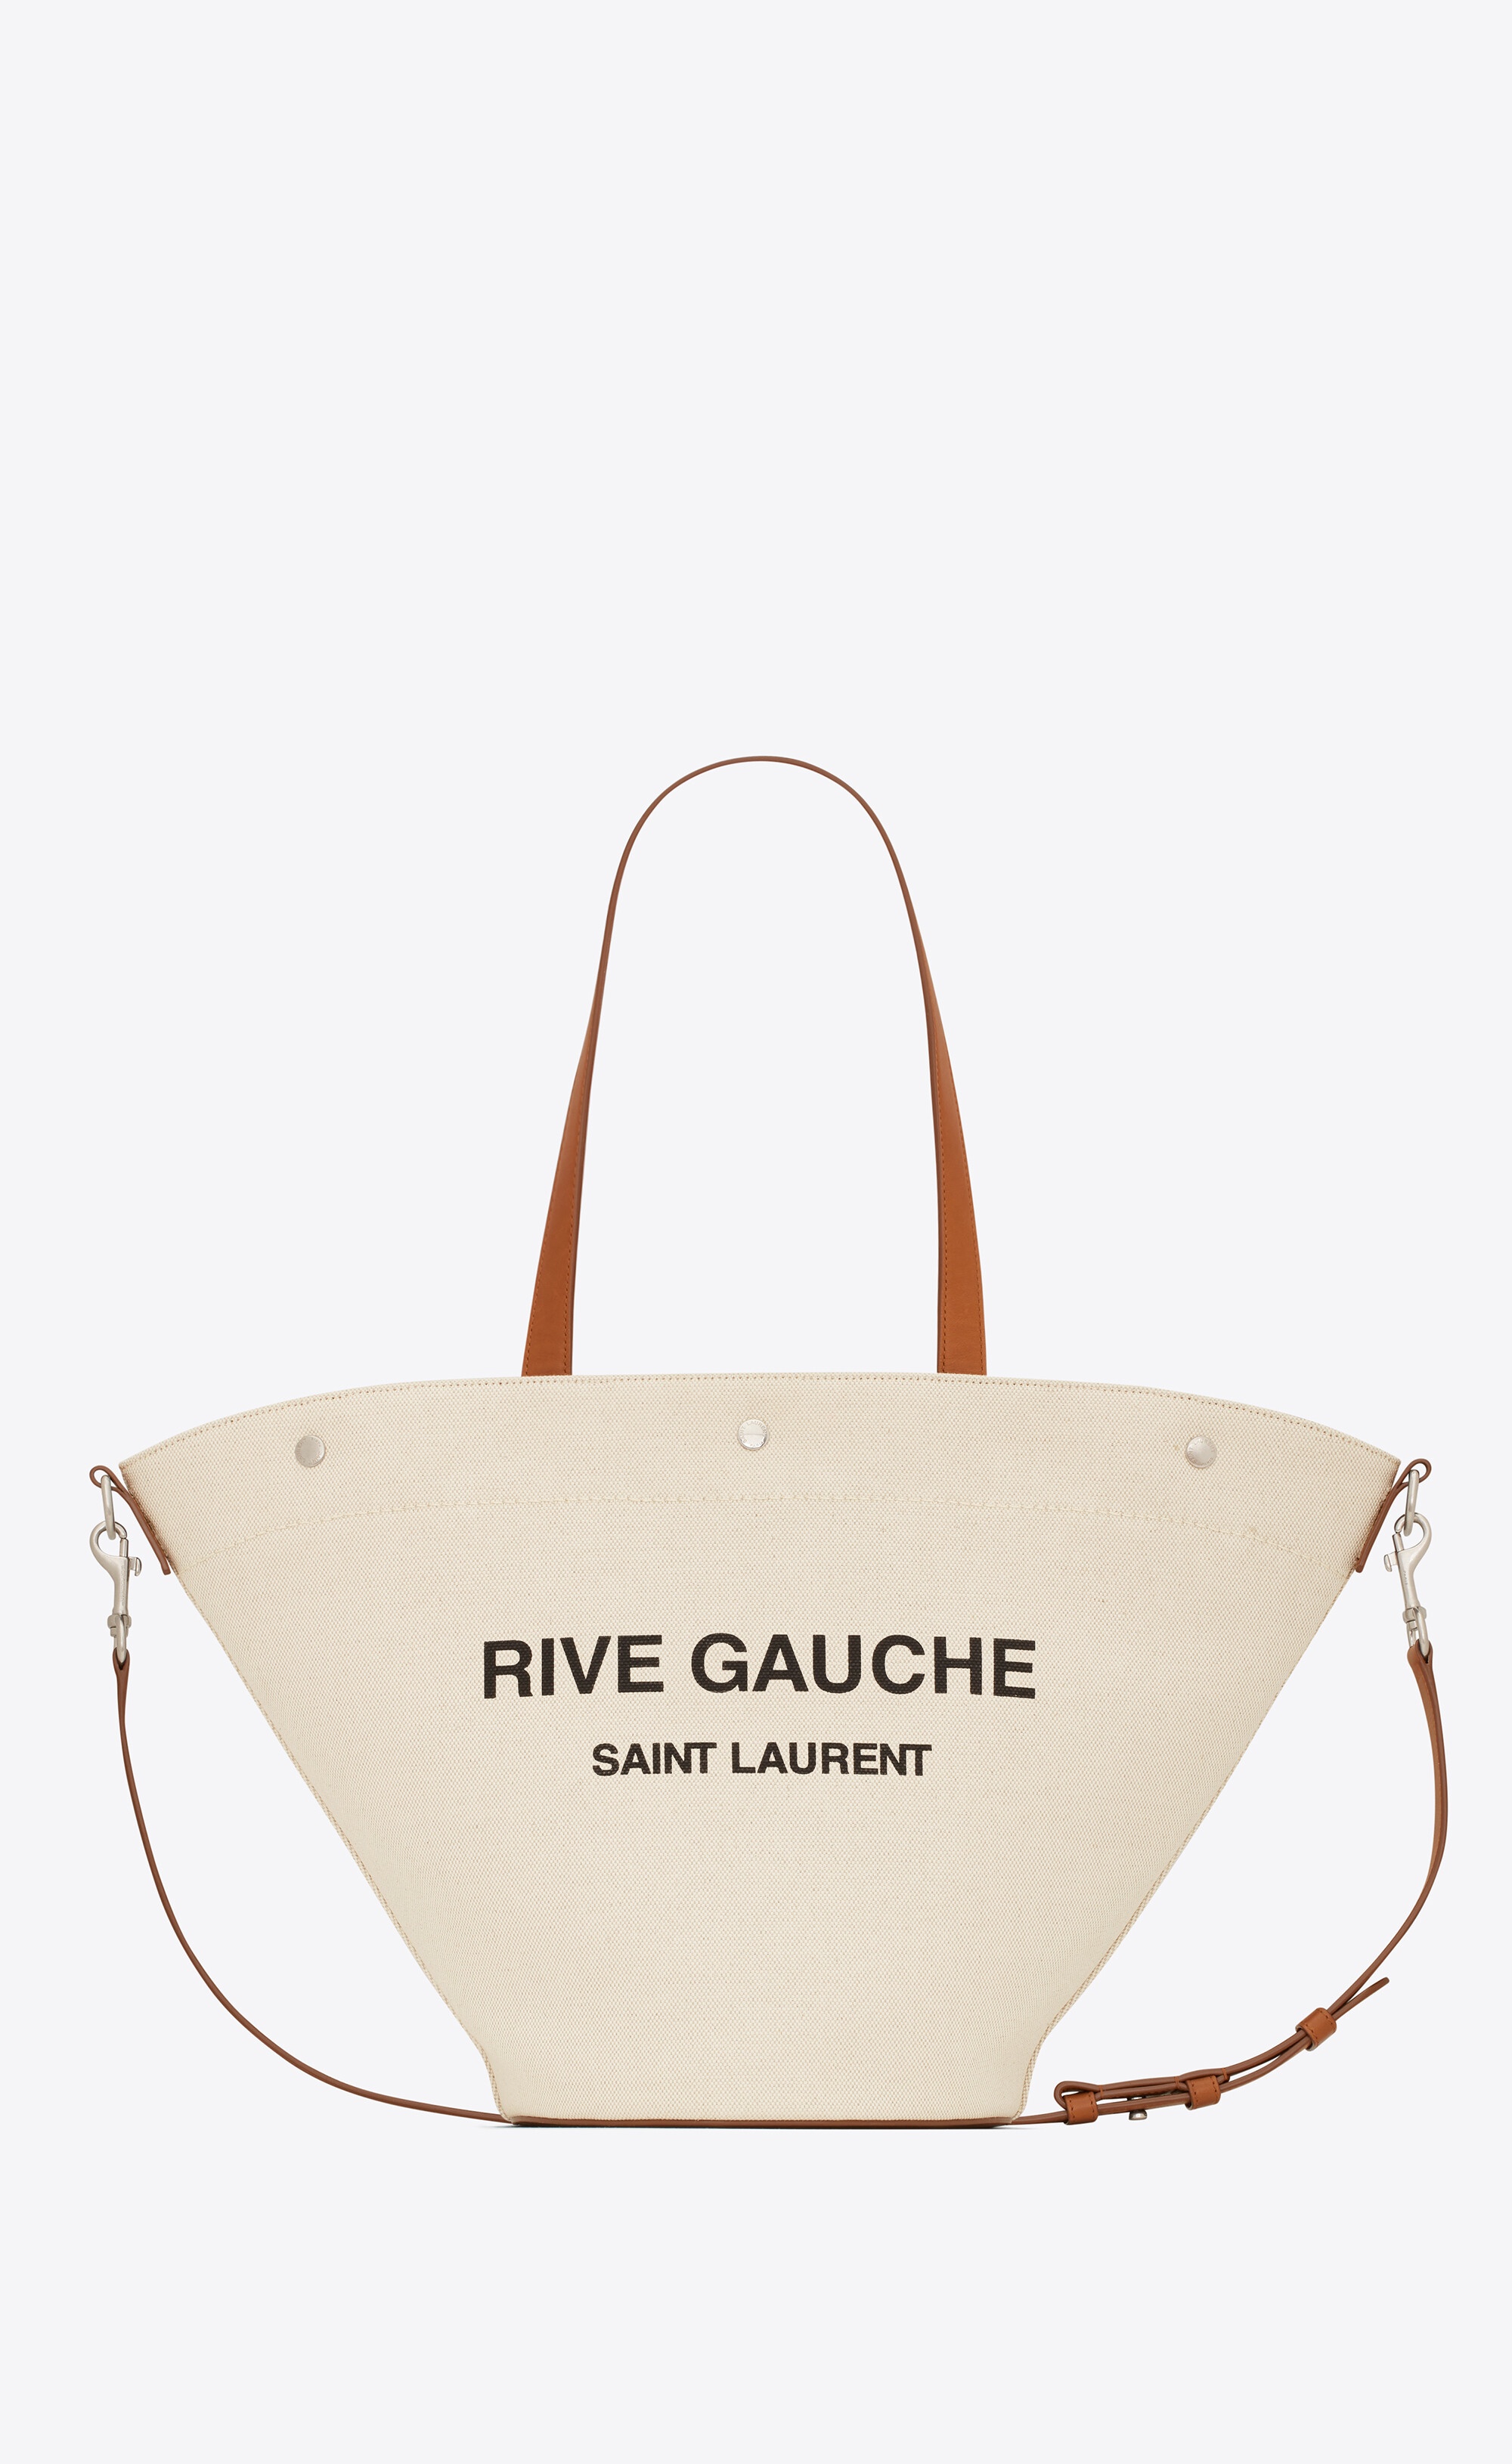 rive gauche tote bag in canvas and vintage leather